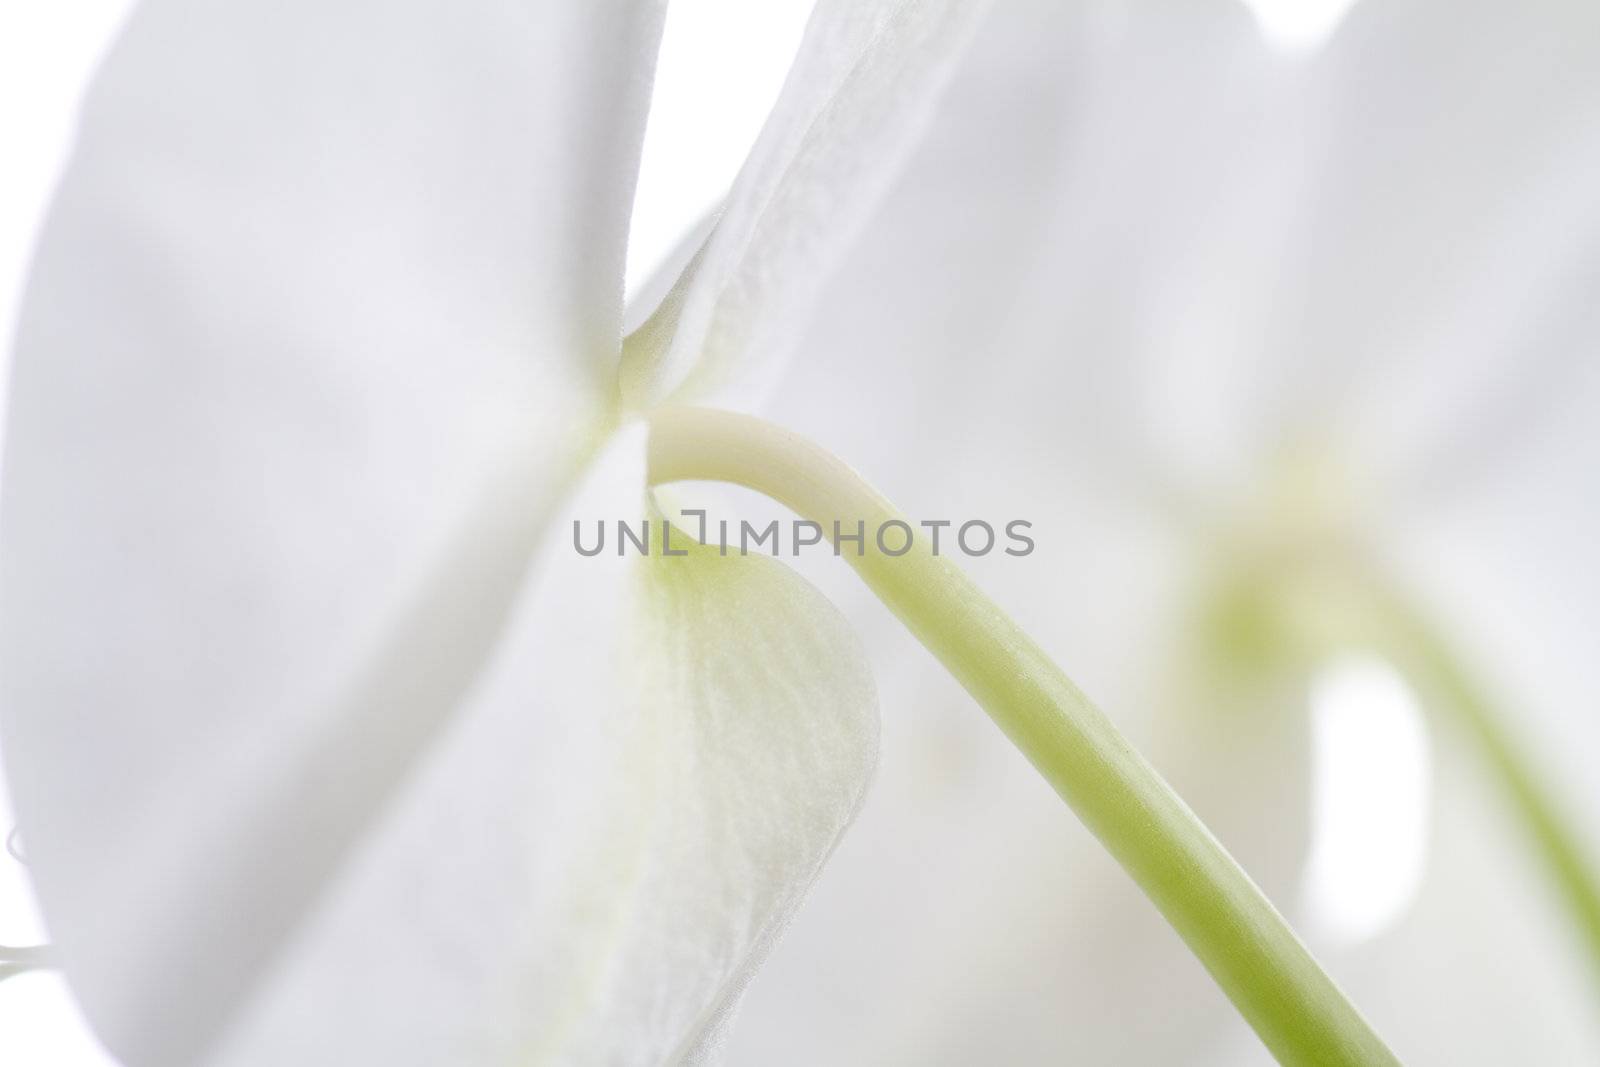 Picture taken of the back of two orchids.